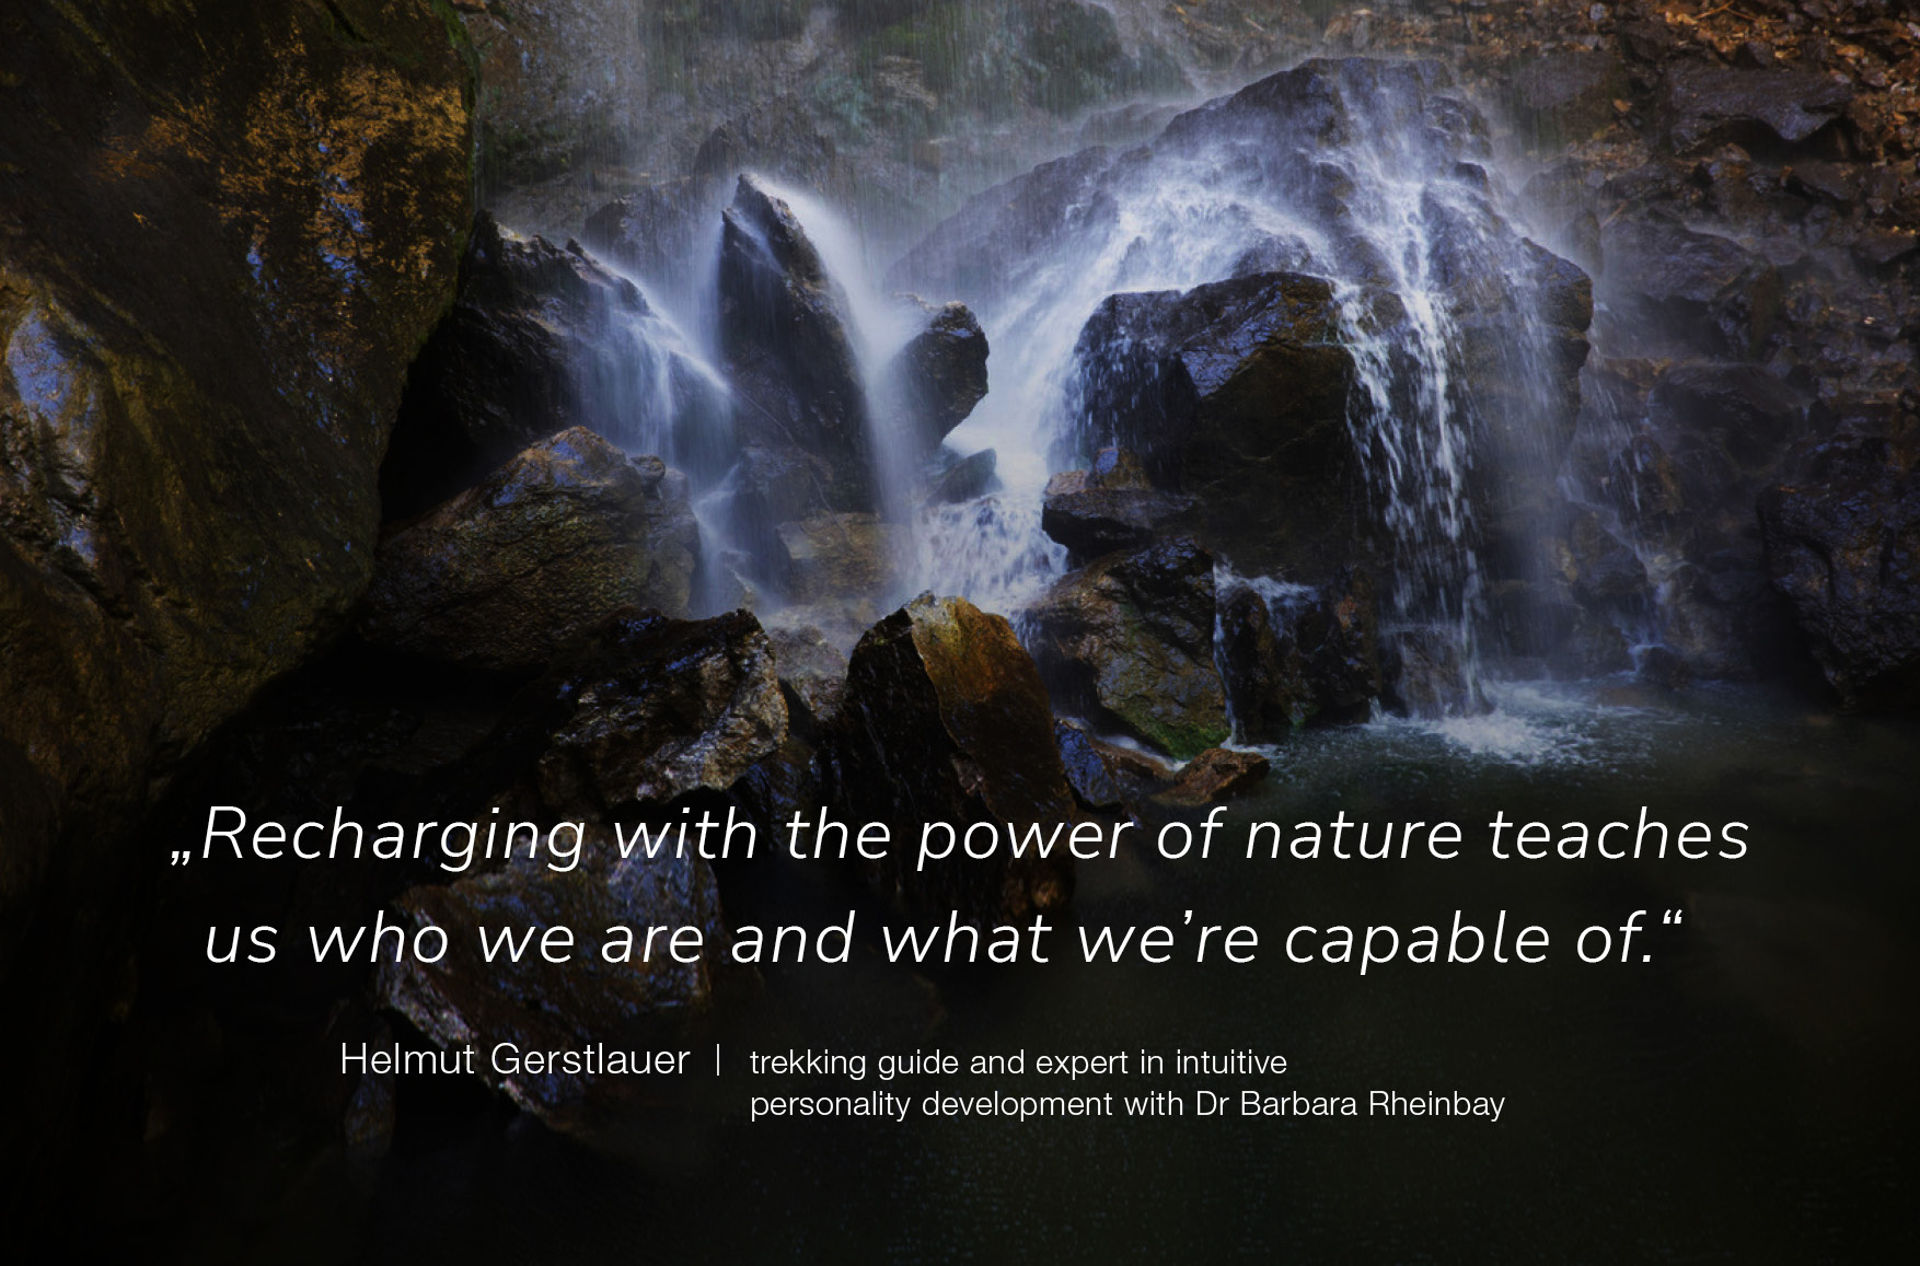 Helmut Gerstlauer – Recharging with the power of nature teaches us who we are and what we’re capable of